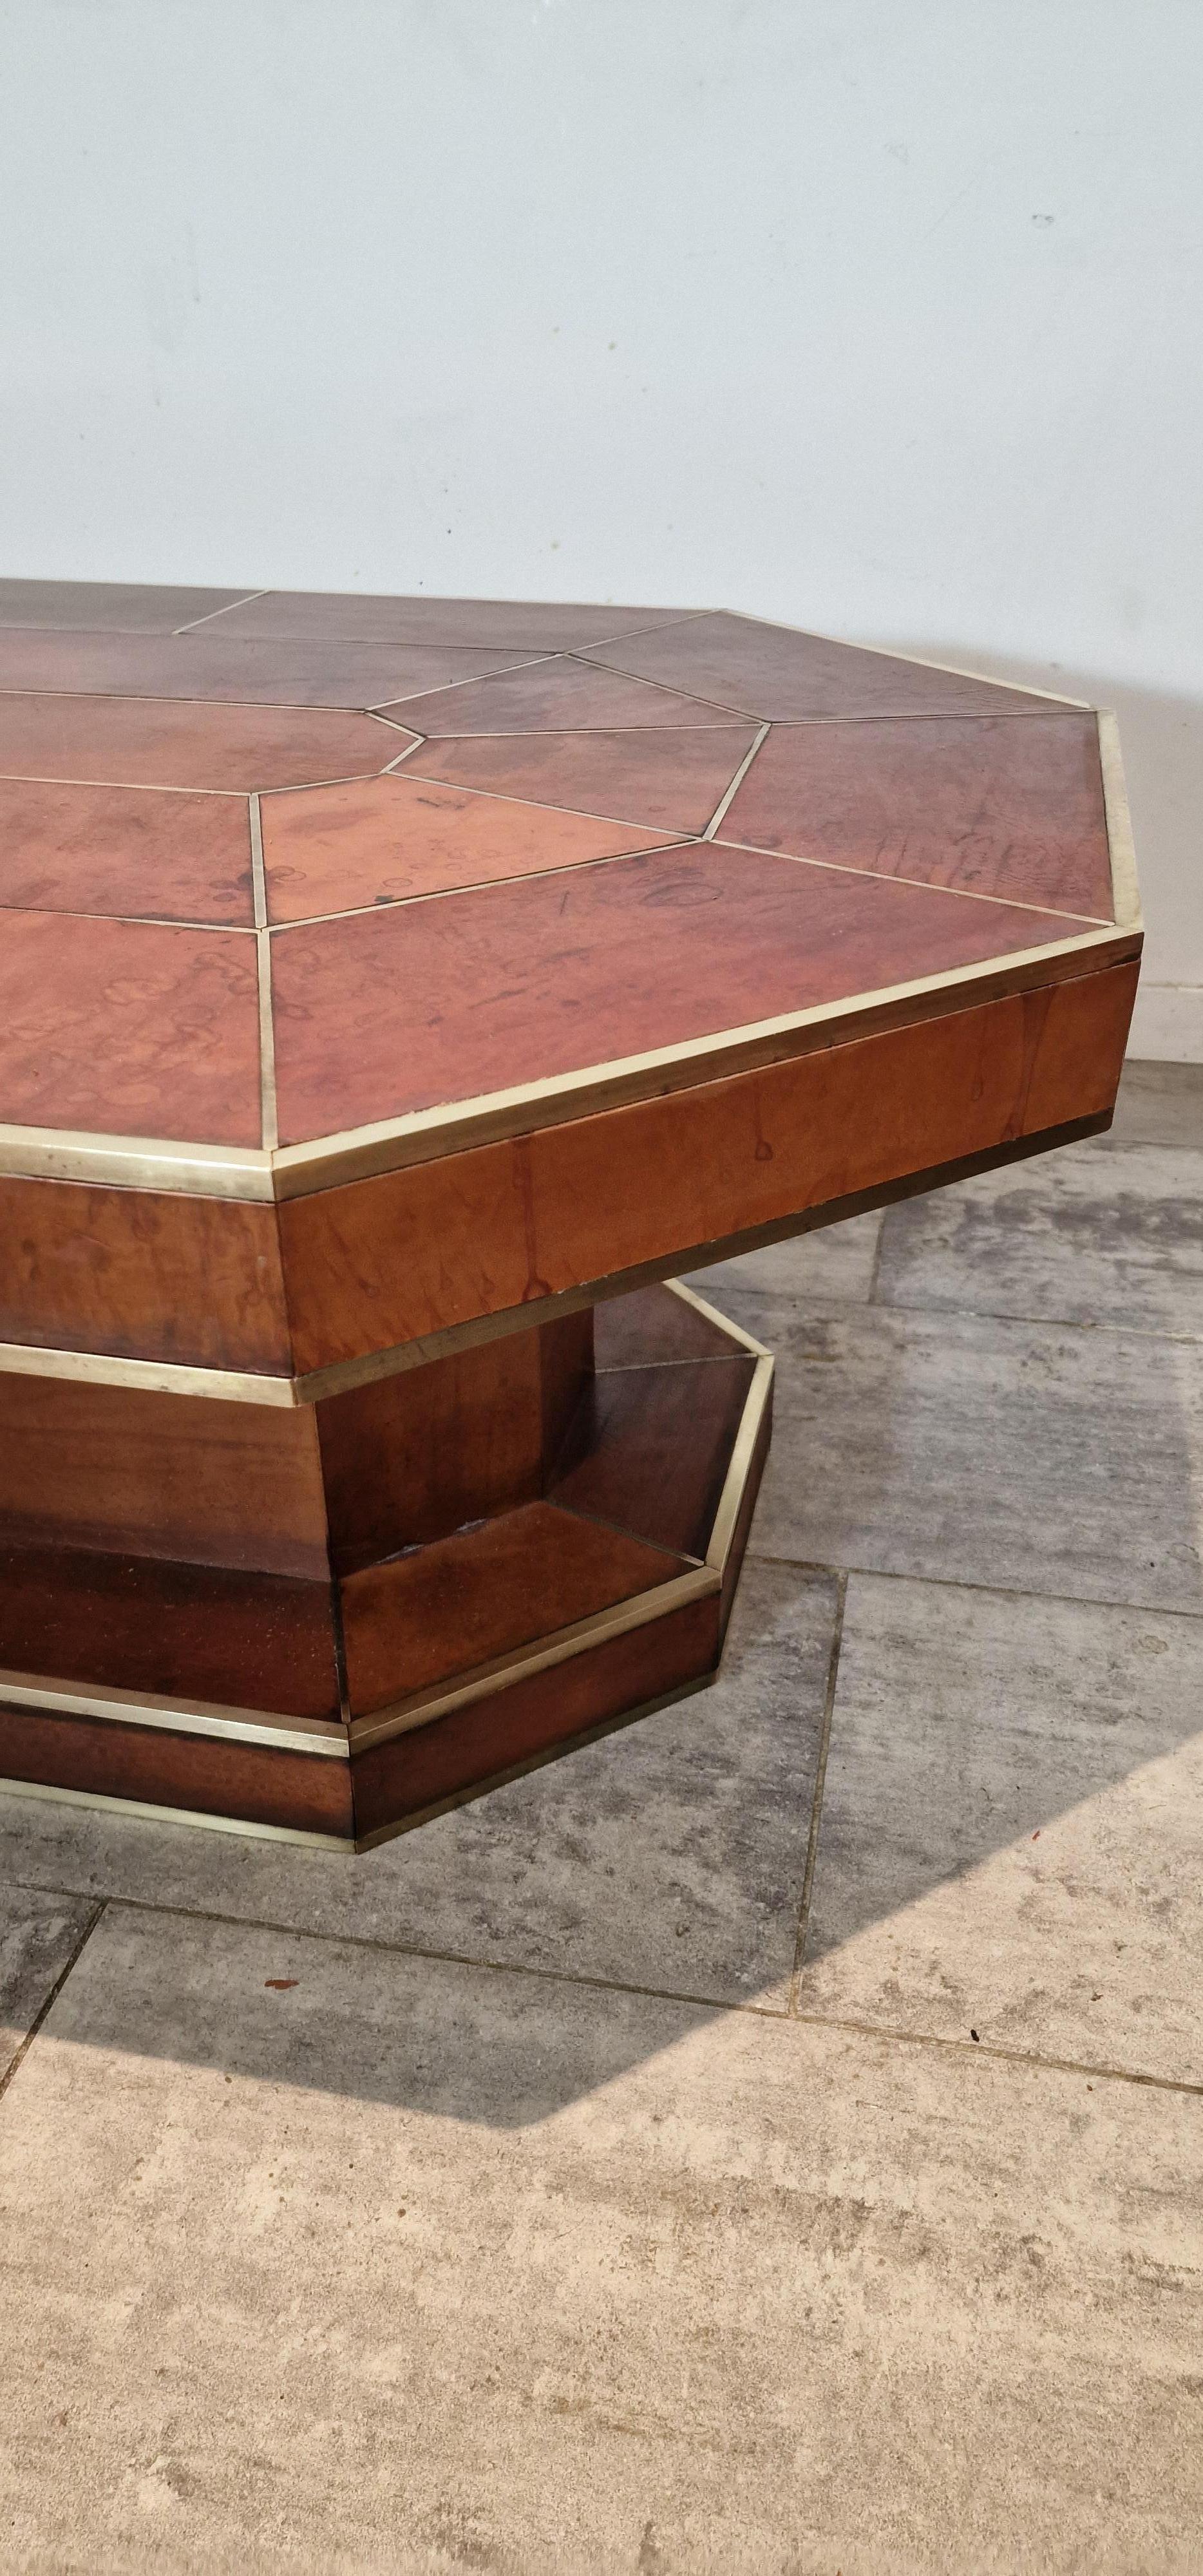 Late 20th Century Large Full Leather Brown Coffee Table with Brass Details from, France For Sale